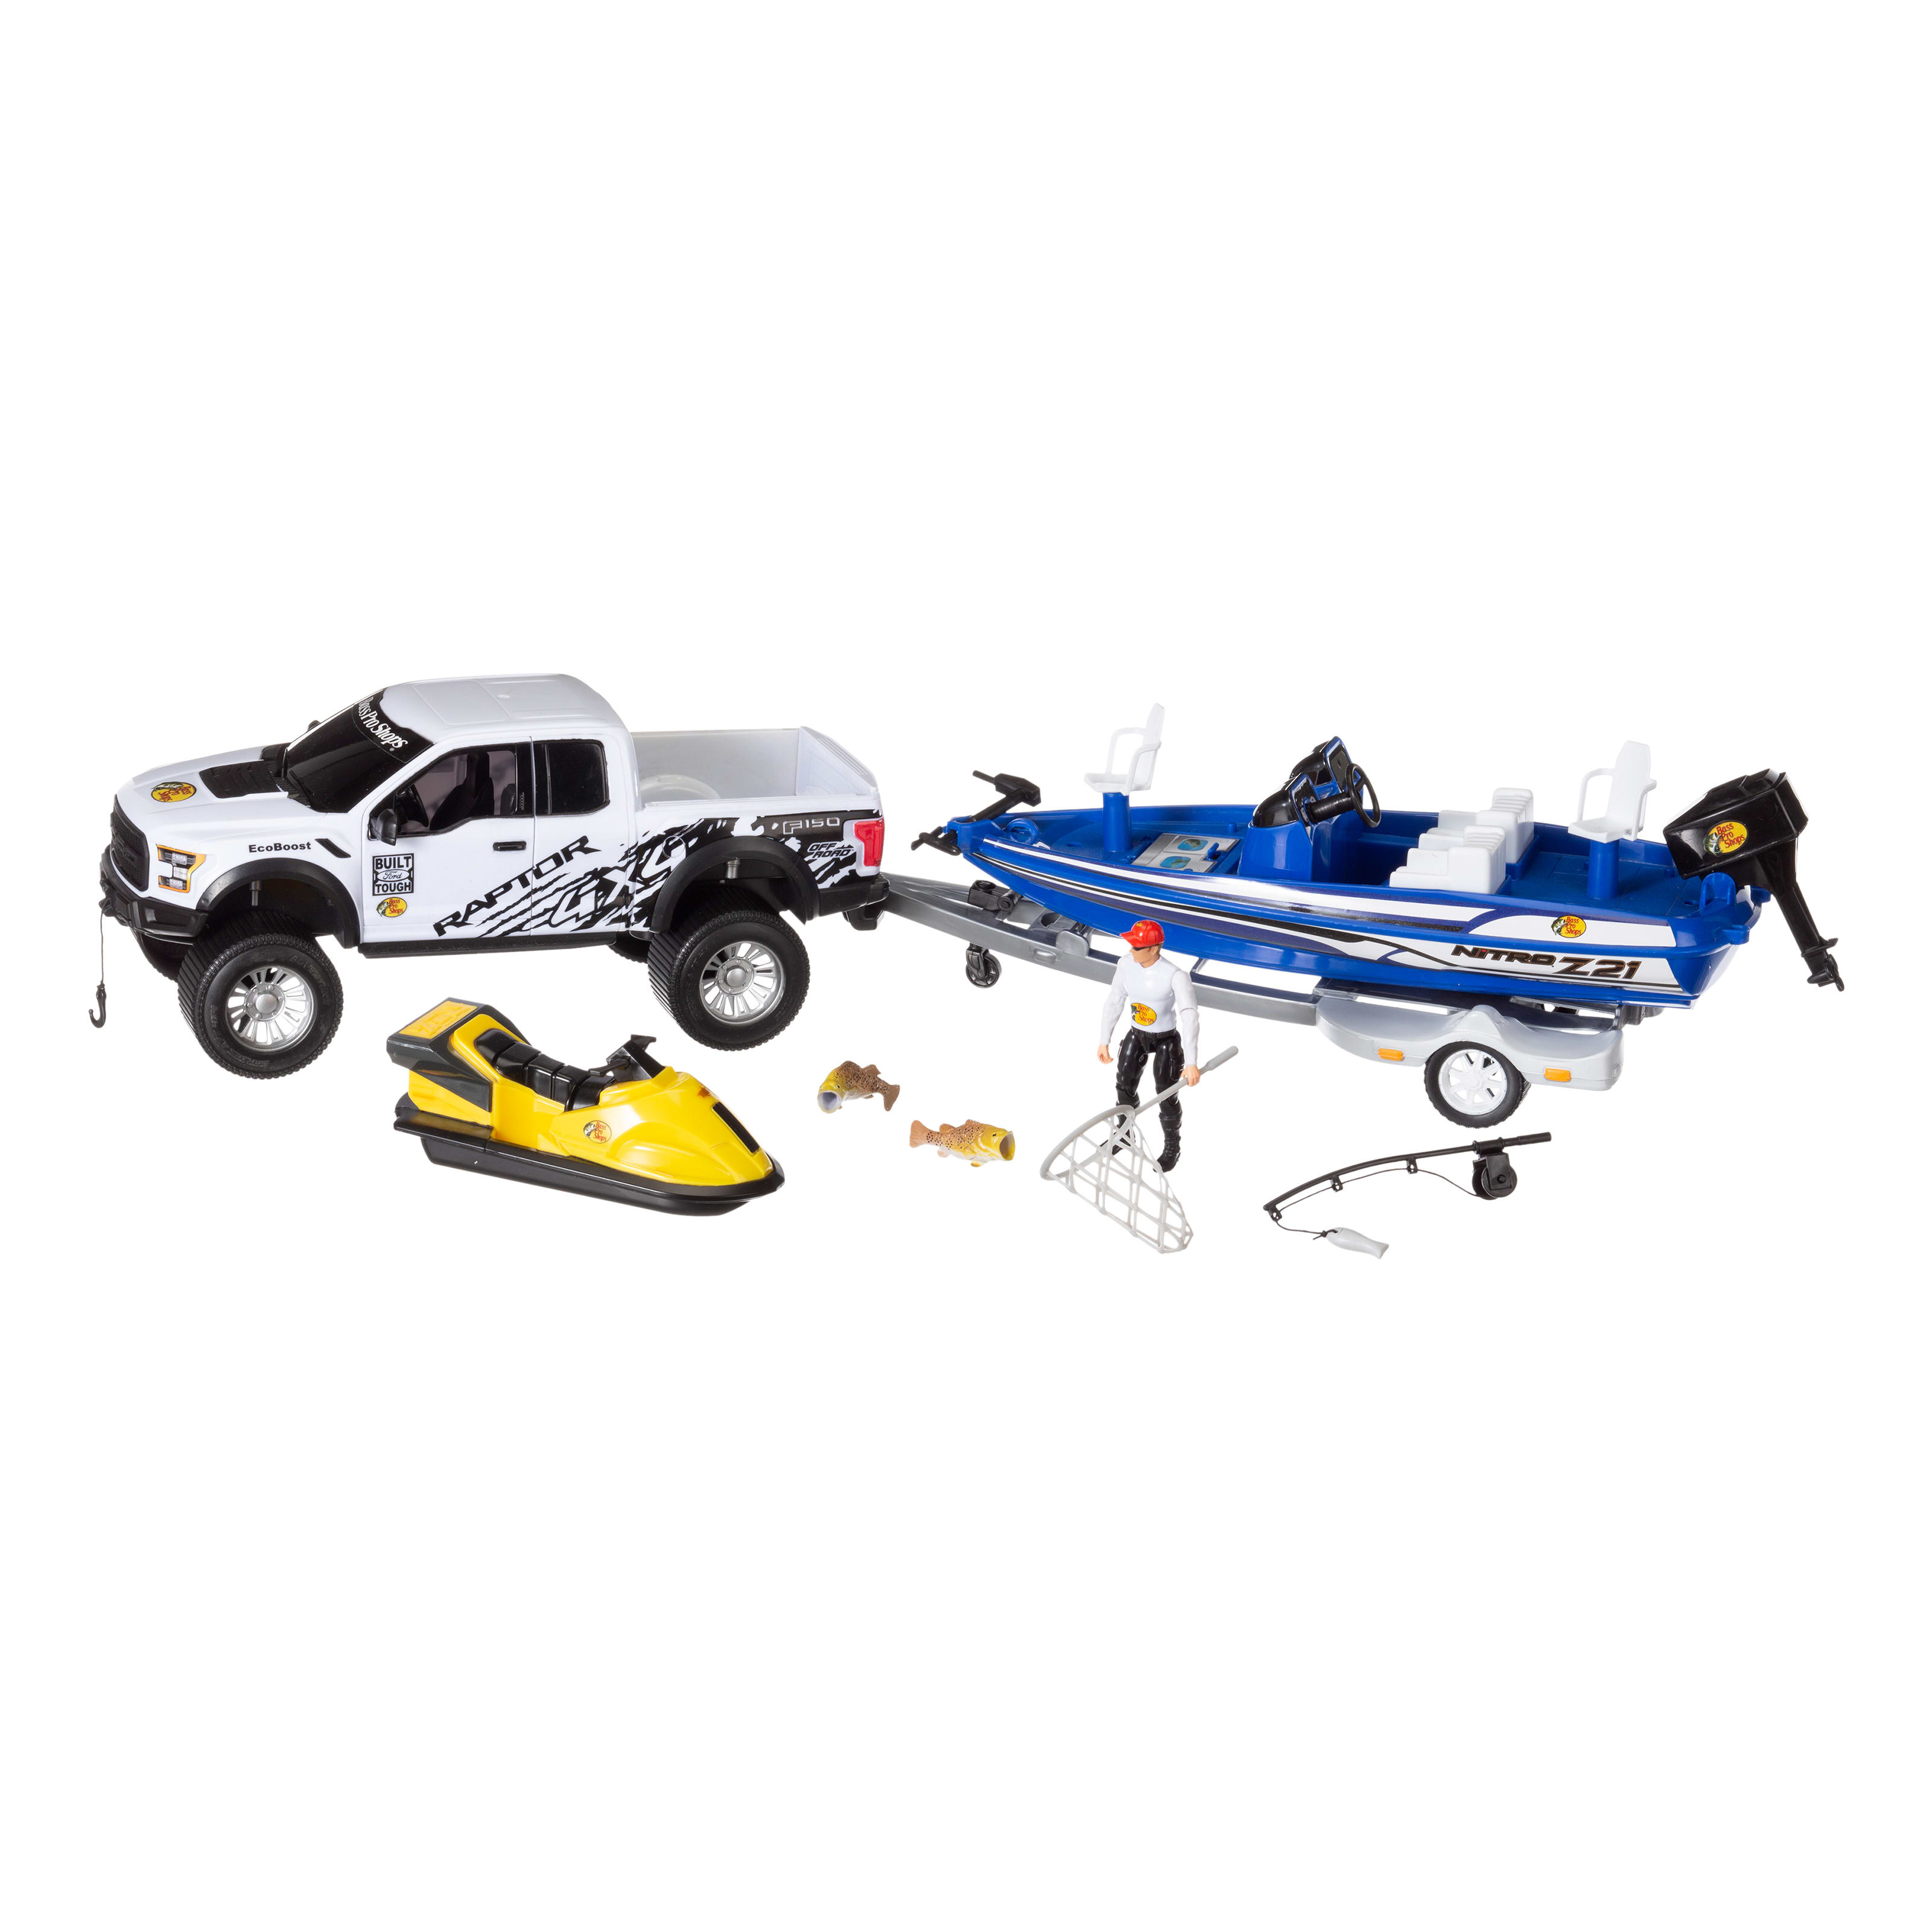 Bass Pro Shops® Imagination Adventure Ford® Raptor with Bass Boat Play Set for Kids